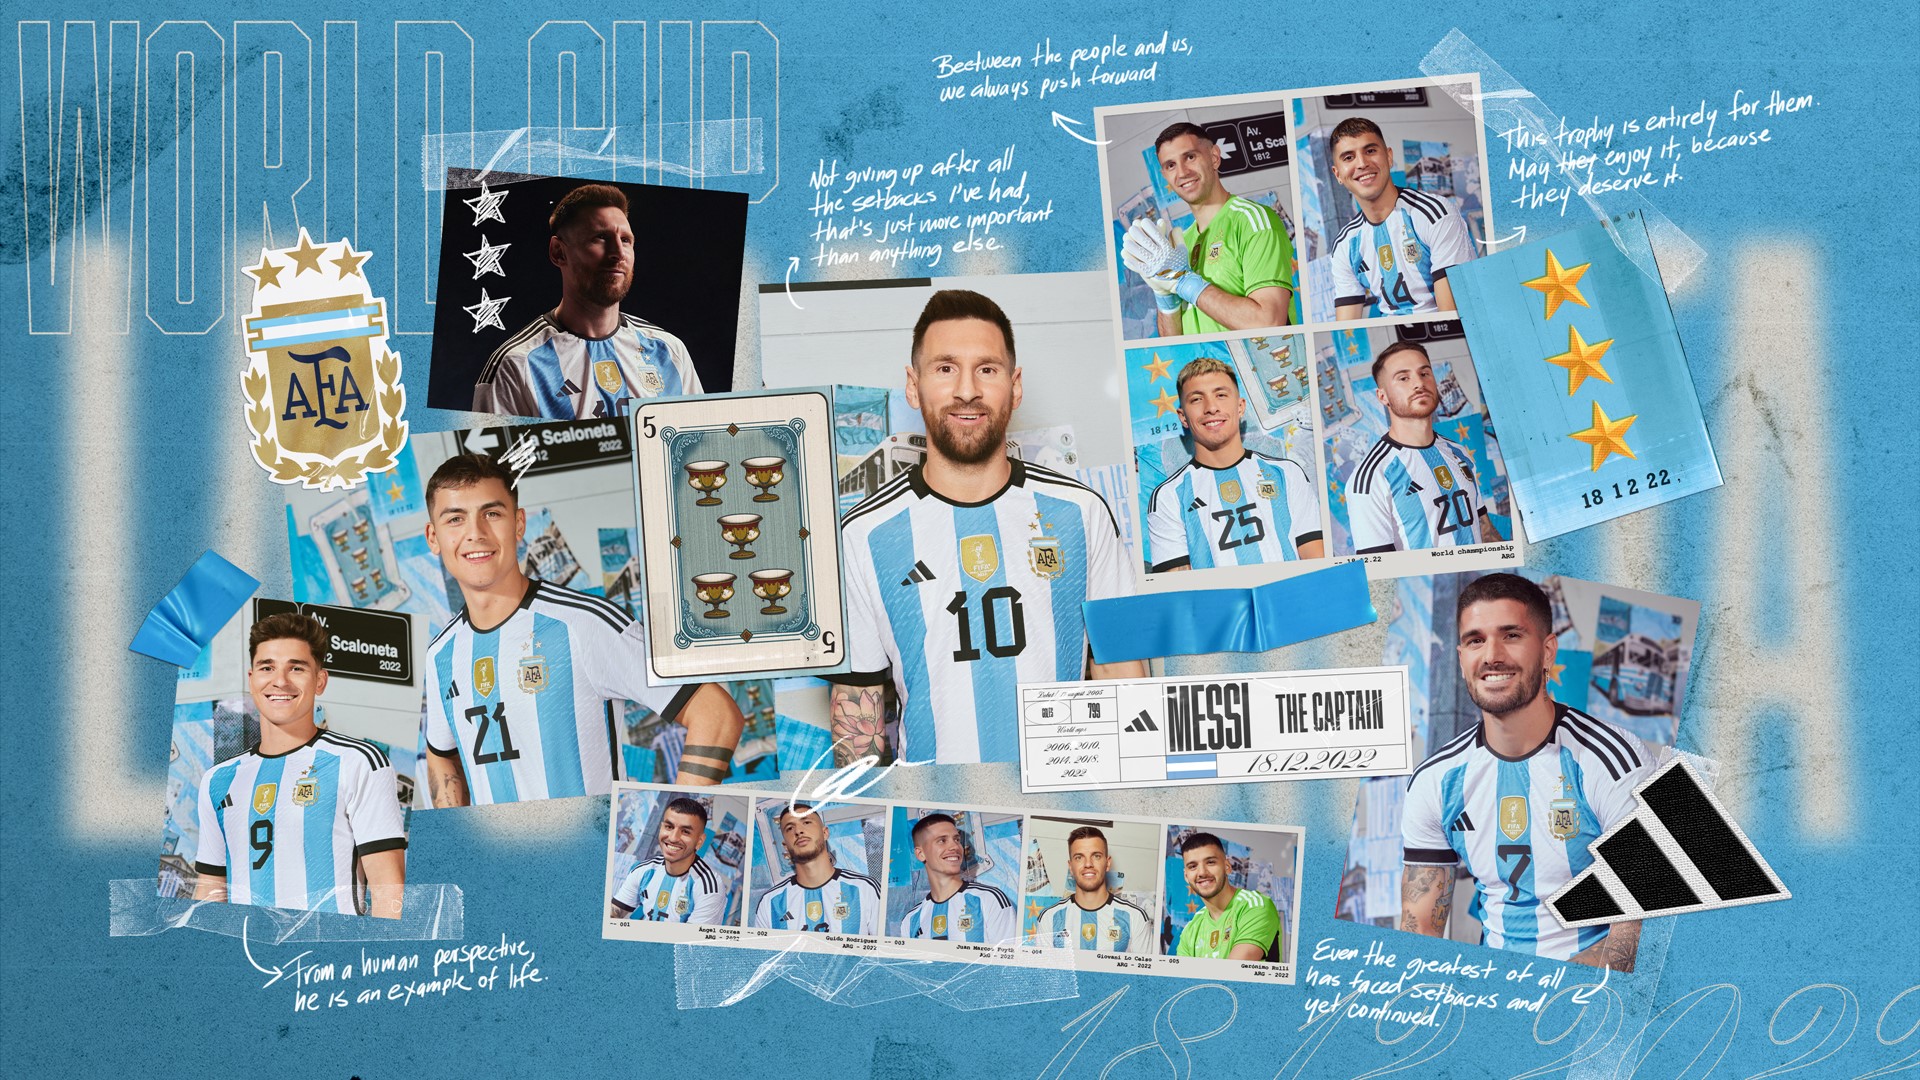 ADIDAS LIONEL MESSI ARGENTINA HOME JERSEY FINAL GAME FIFA WORLD CUP QATAR  2022